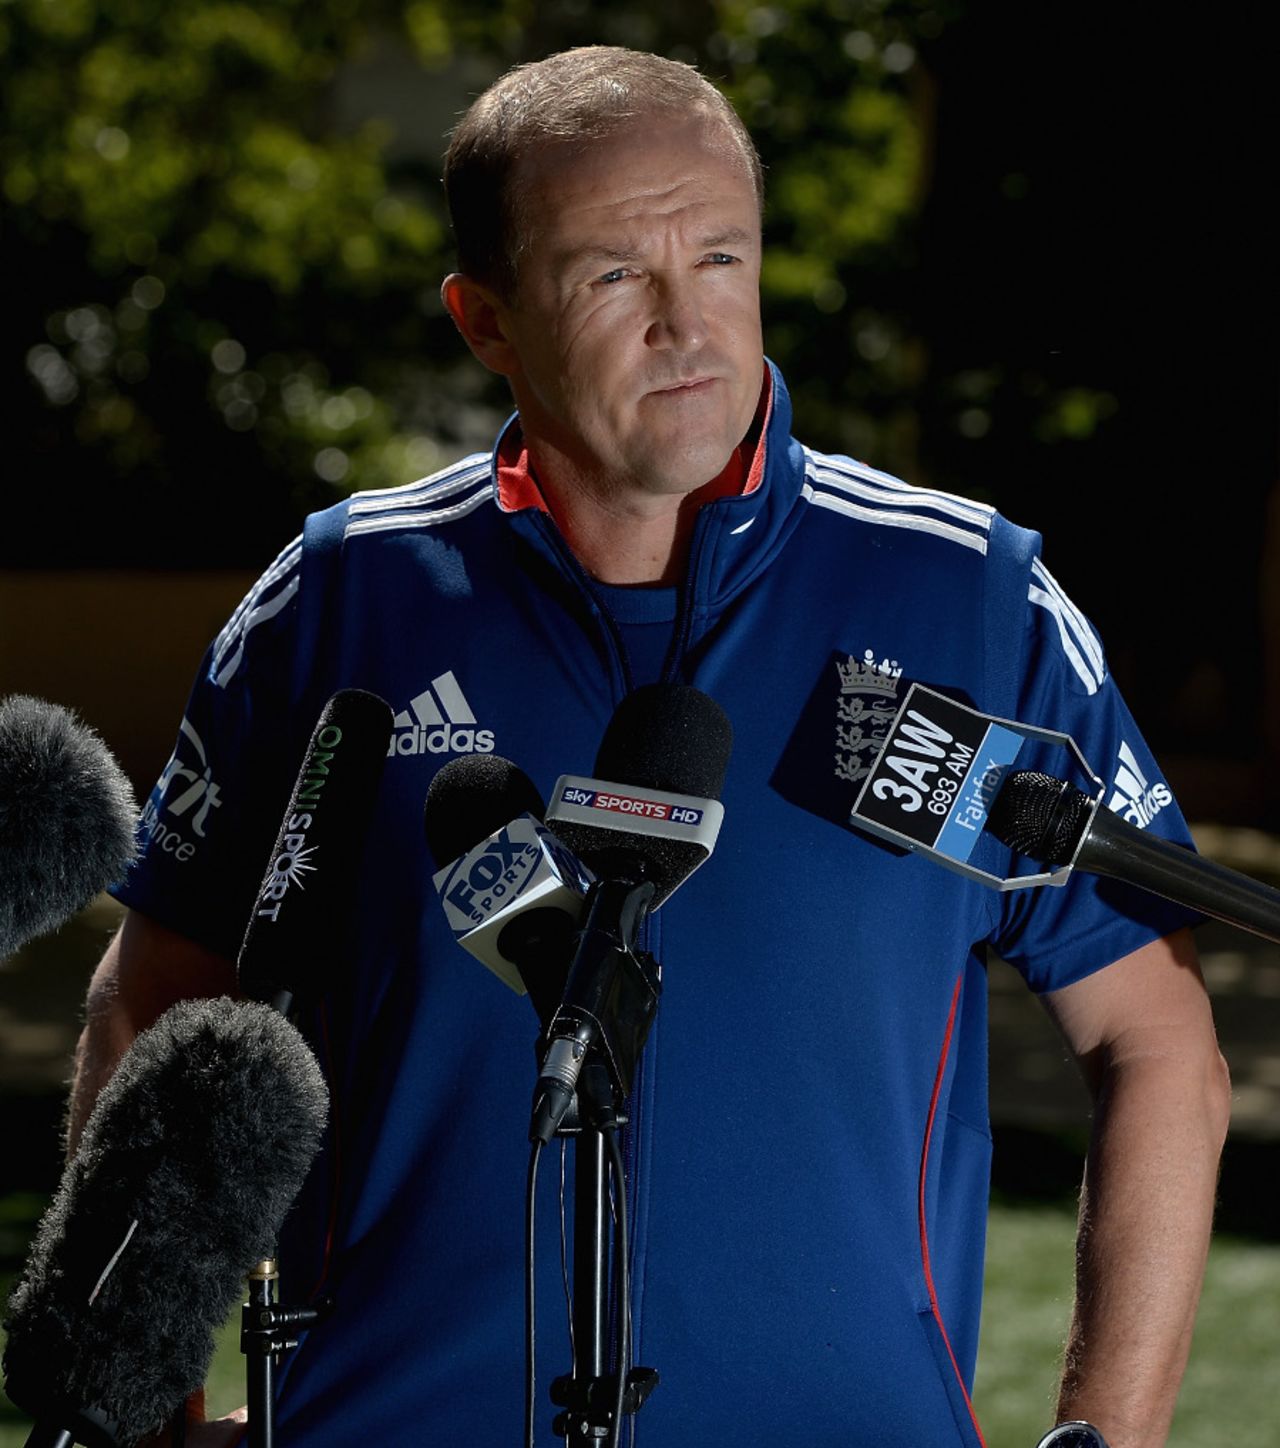 Andy Flower speaks to the media in Melbourne, December 30, 2013